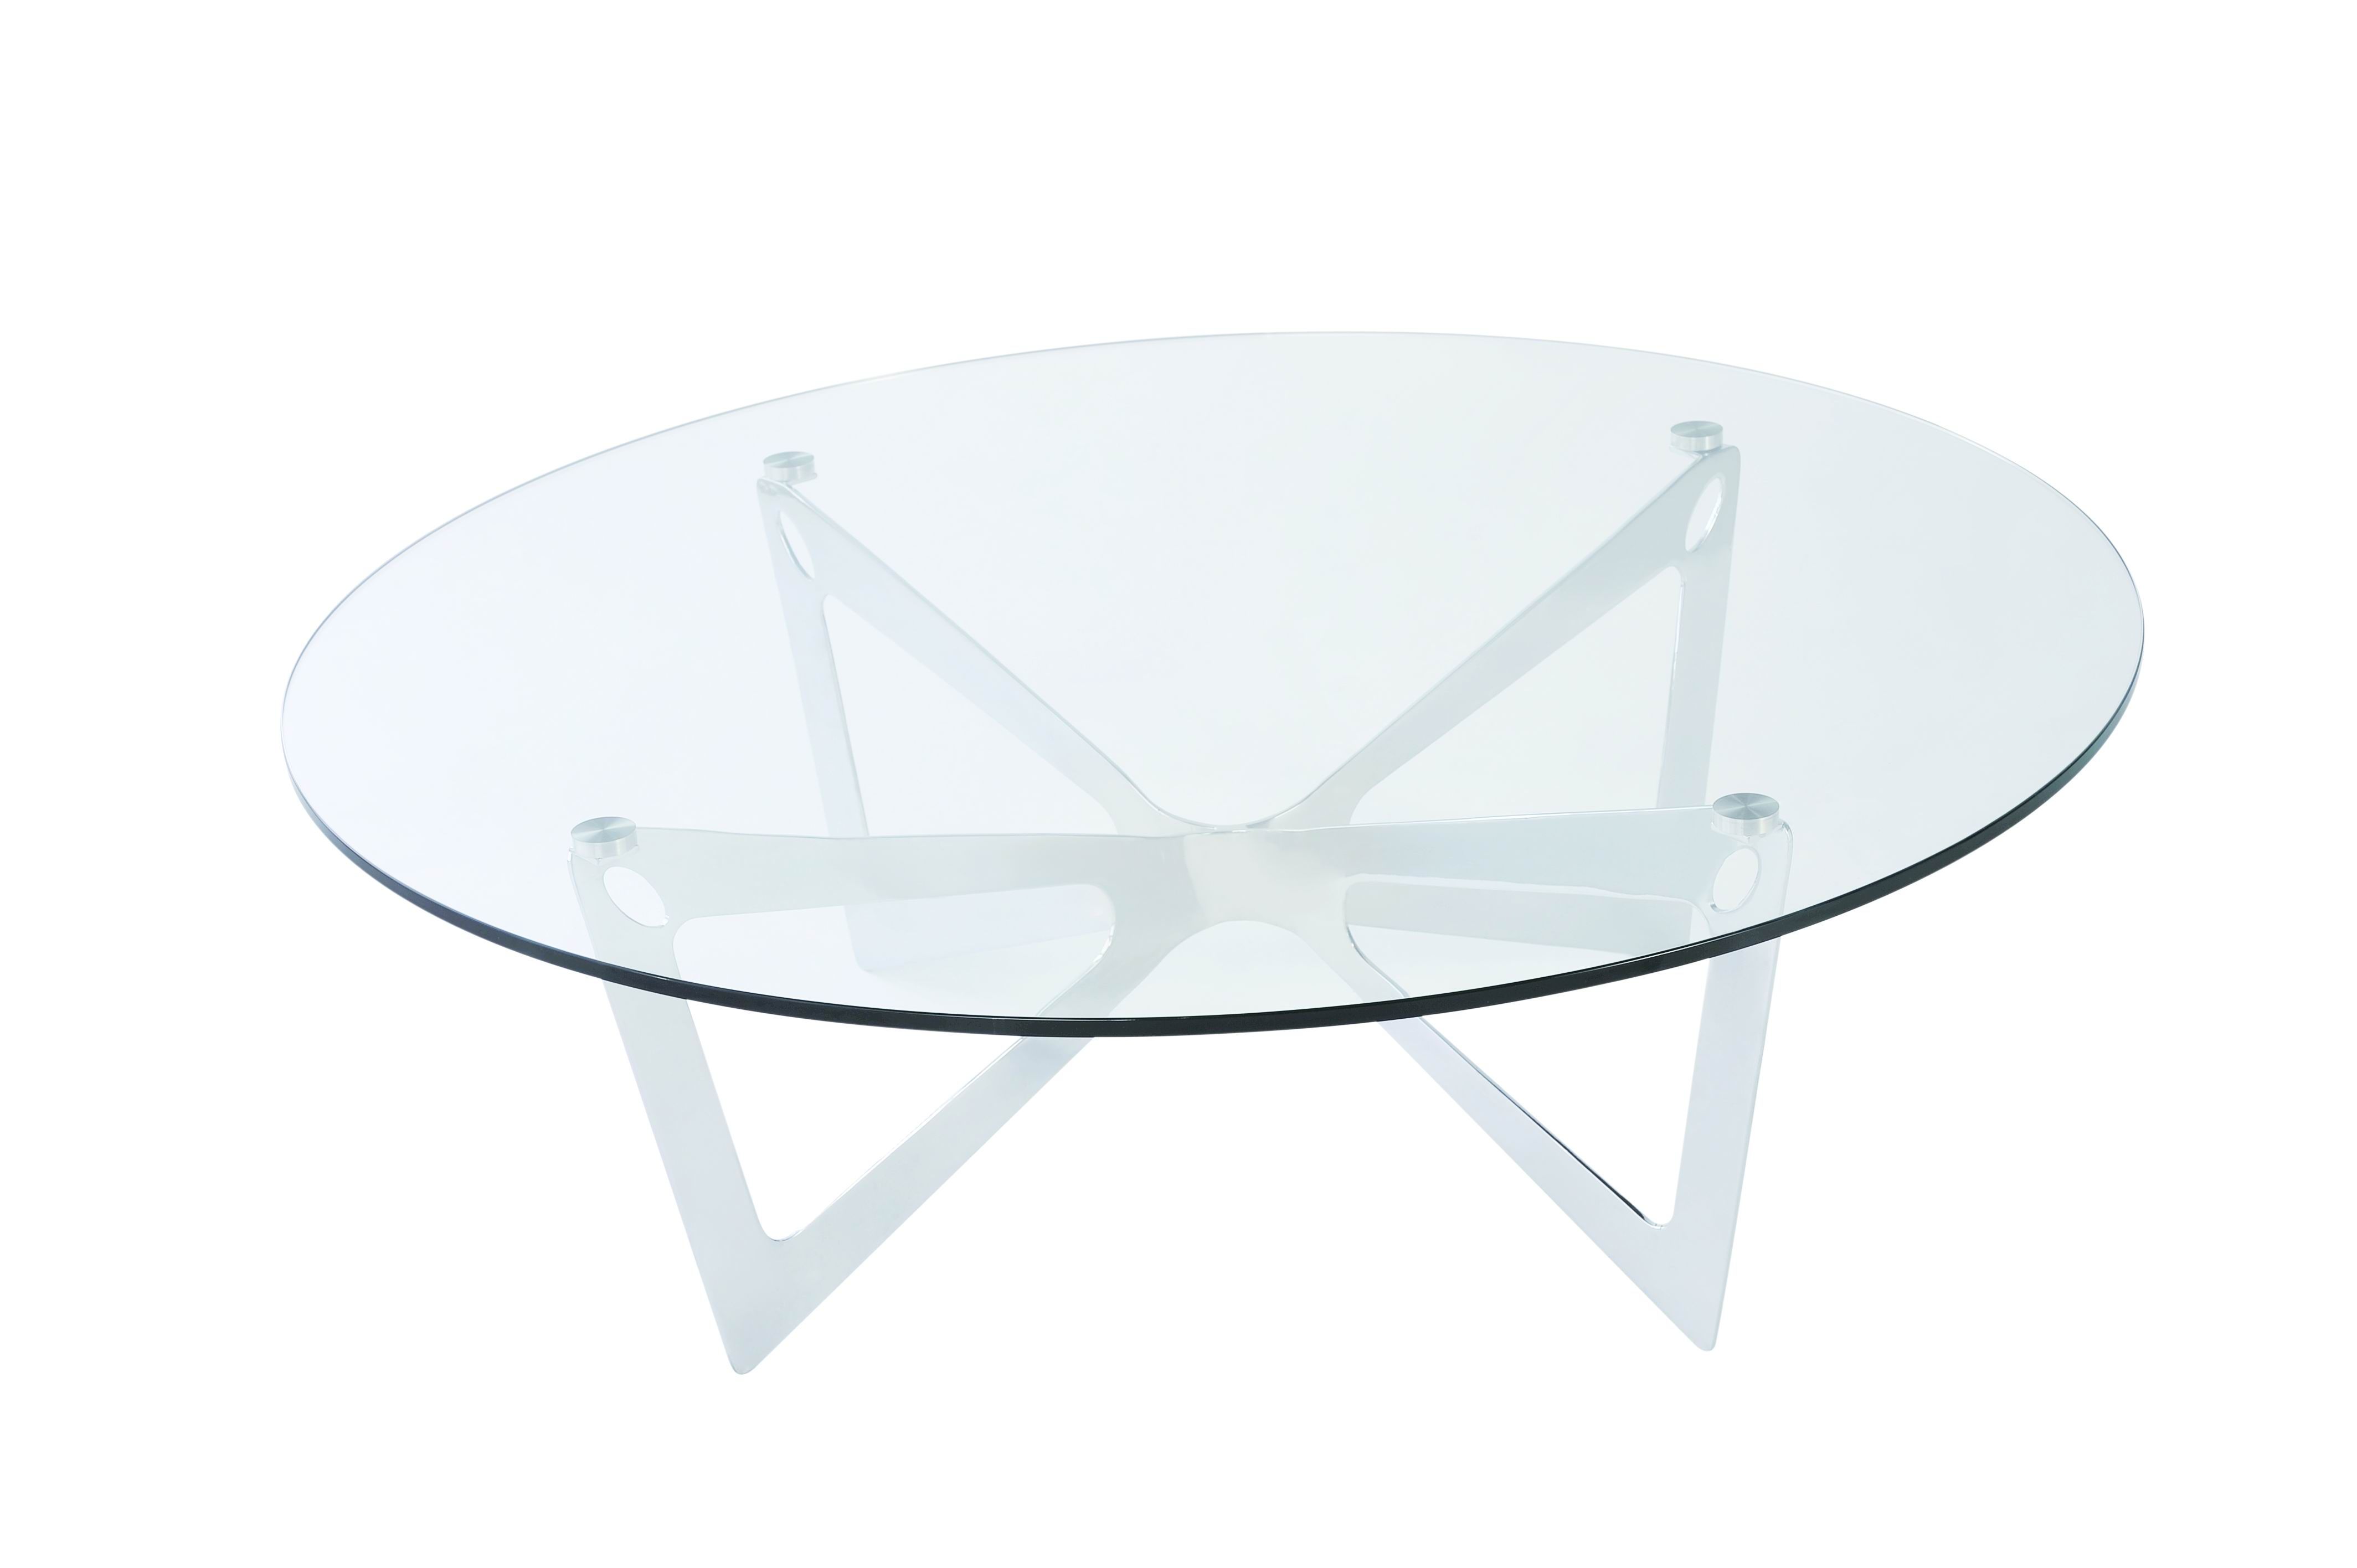 Contemporary Round Glass Coffee Table Living Room Furniture Contemporary Round Glass Top Coffee Table With Chrome Metal Base Round Coffee Table With Metal Legs (View 3 of 10)